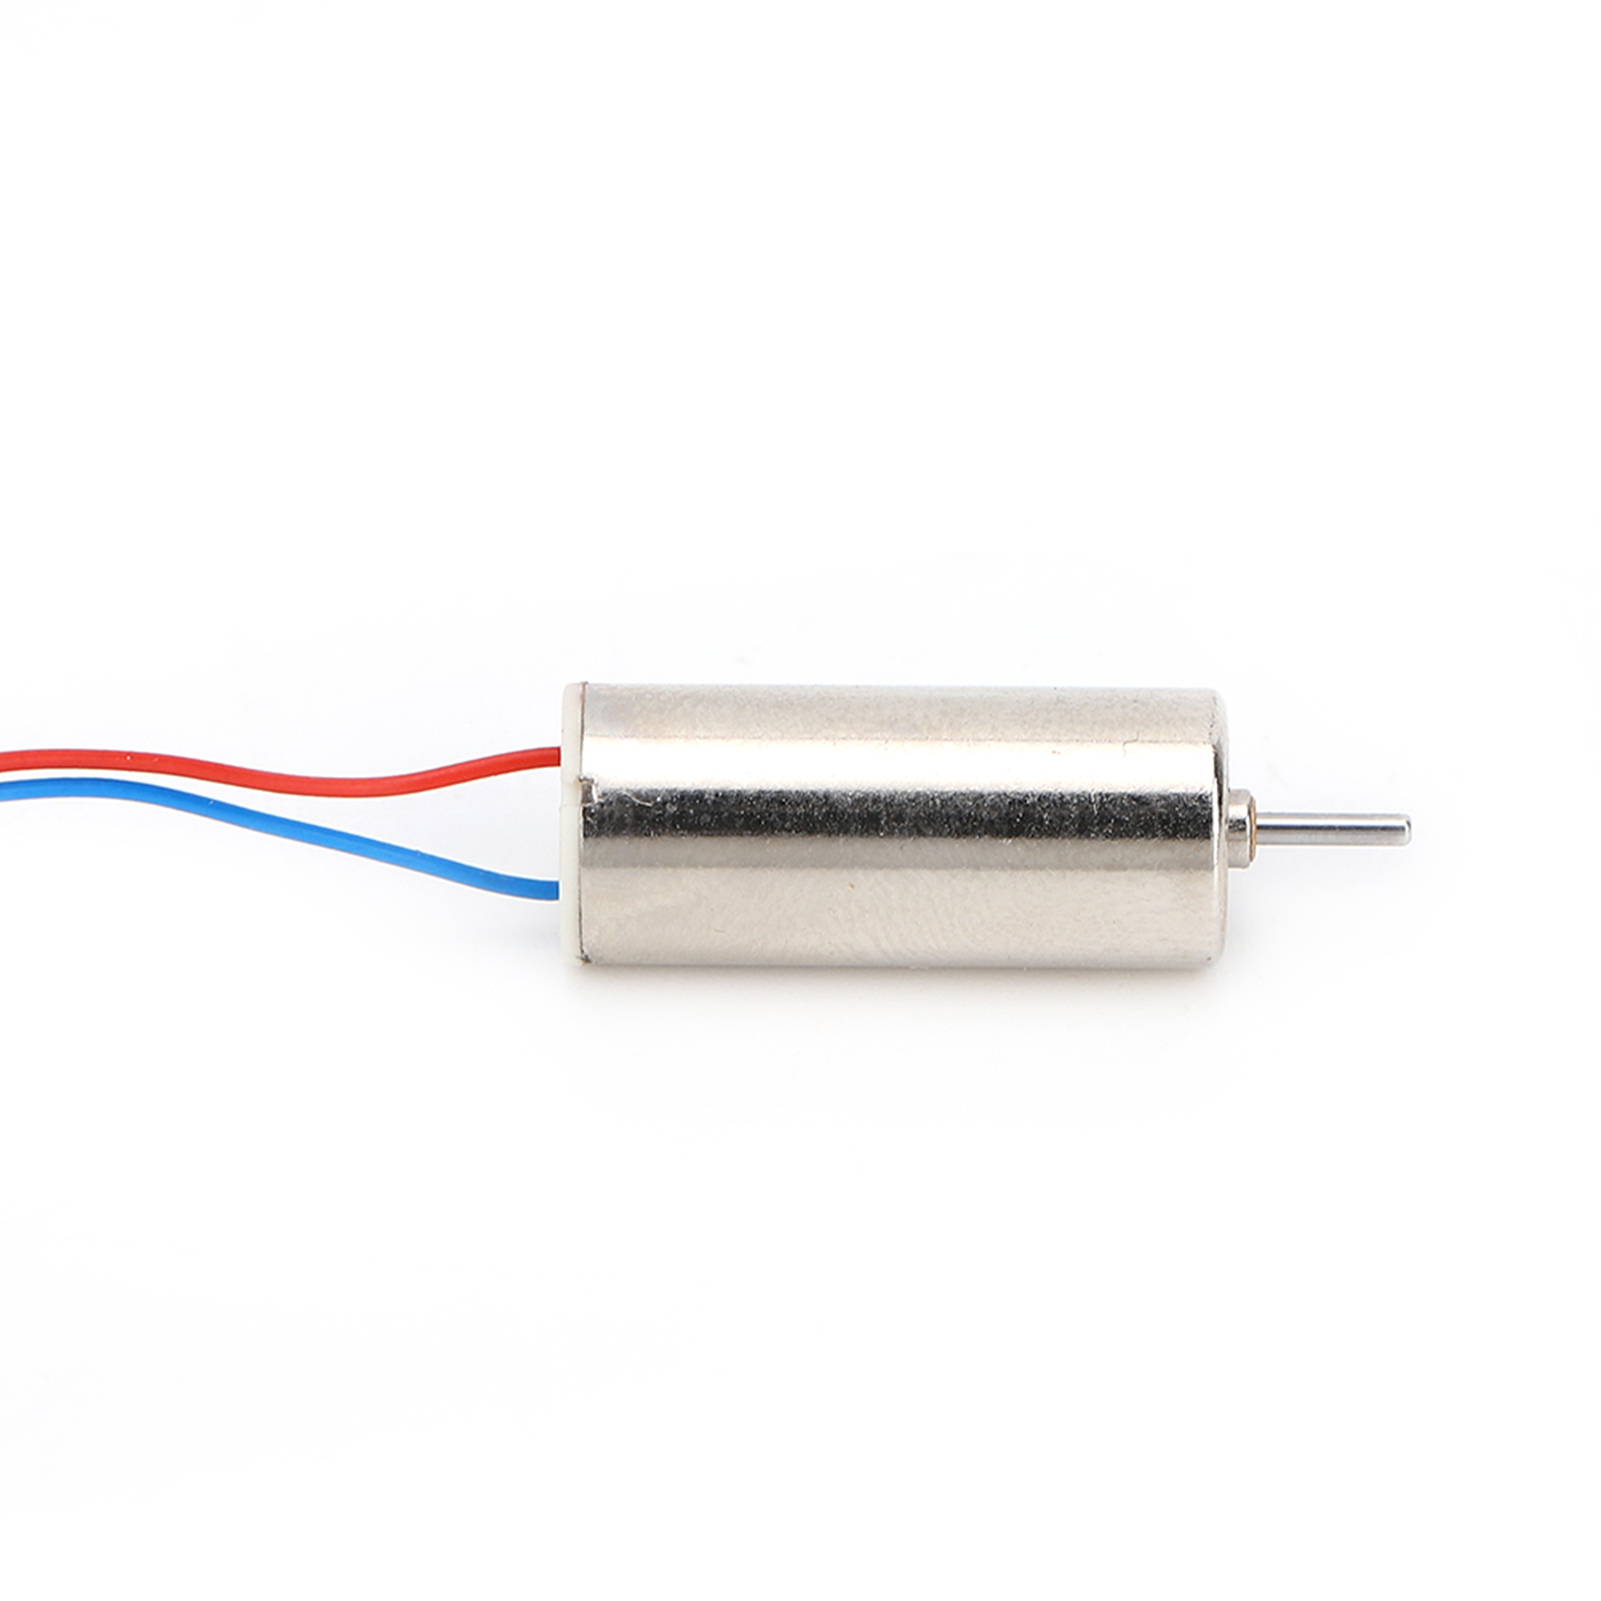 8.5mm Drone Motor for 12cm Tail Circuit